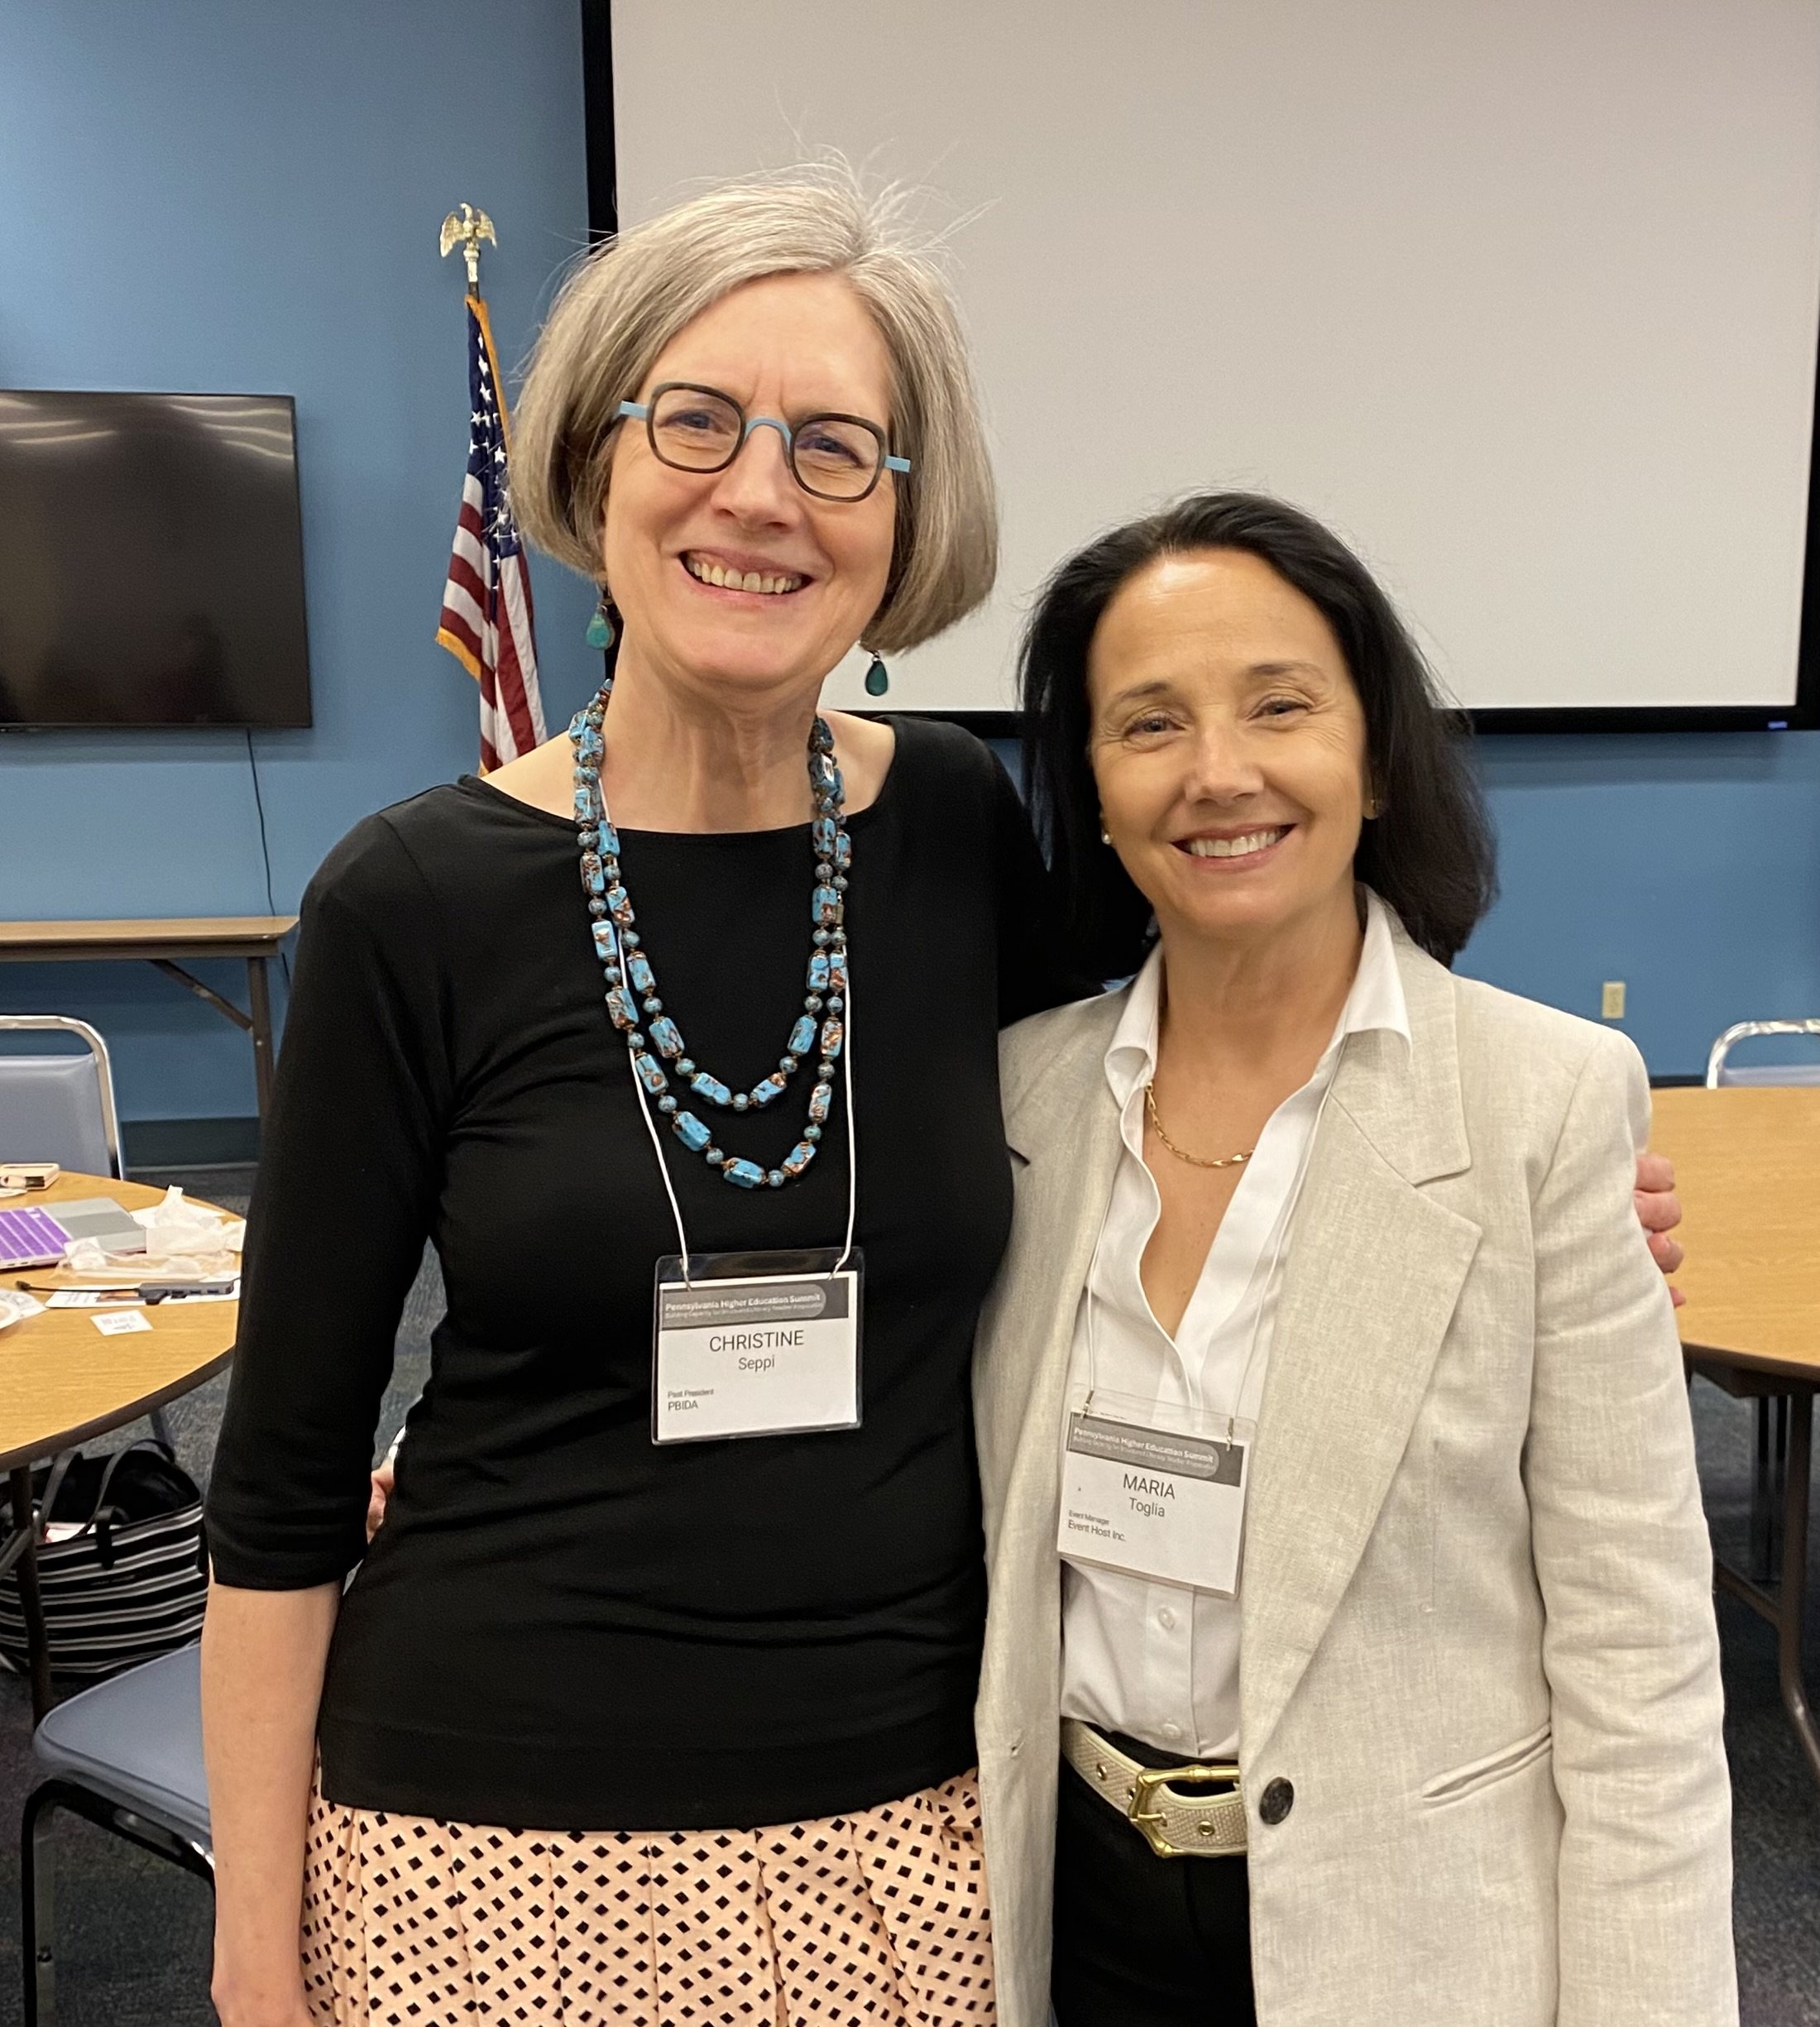 Maria Toglia and Chrstine Seppi- Chair and co-chair of the PA Higher Ed Summit 2023